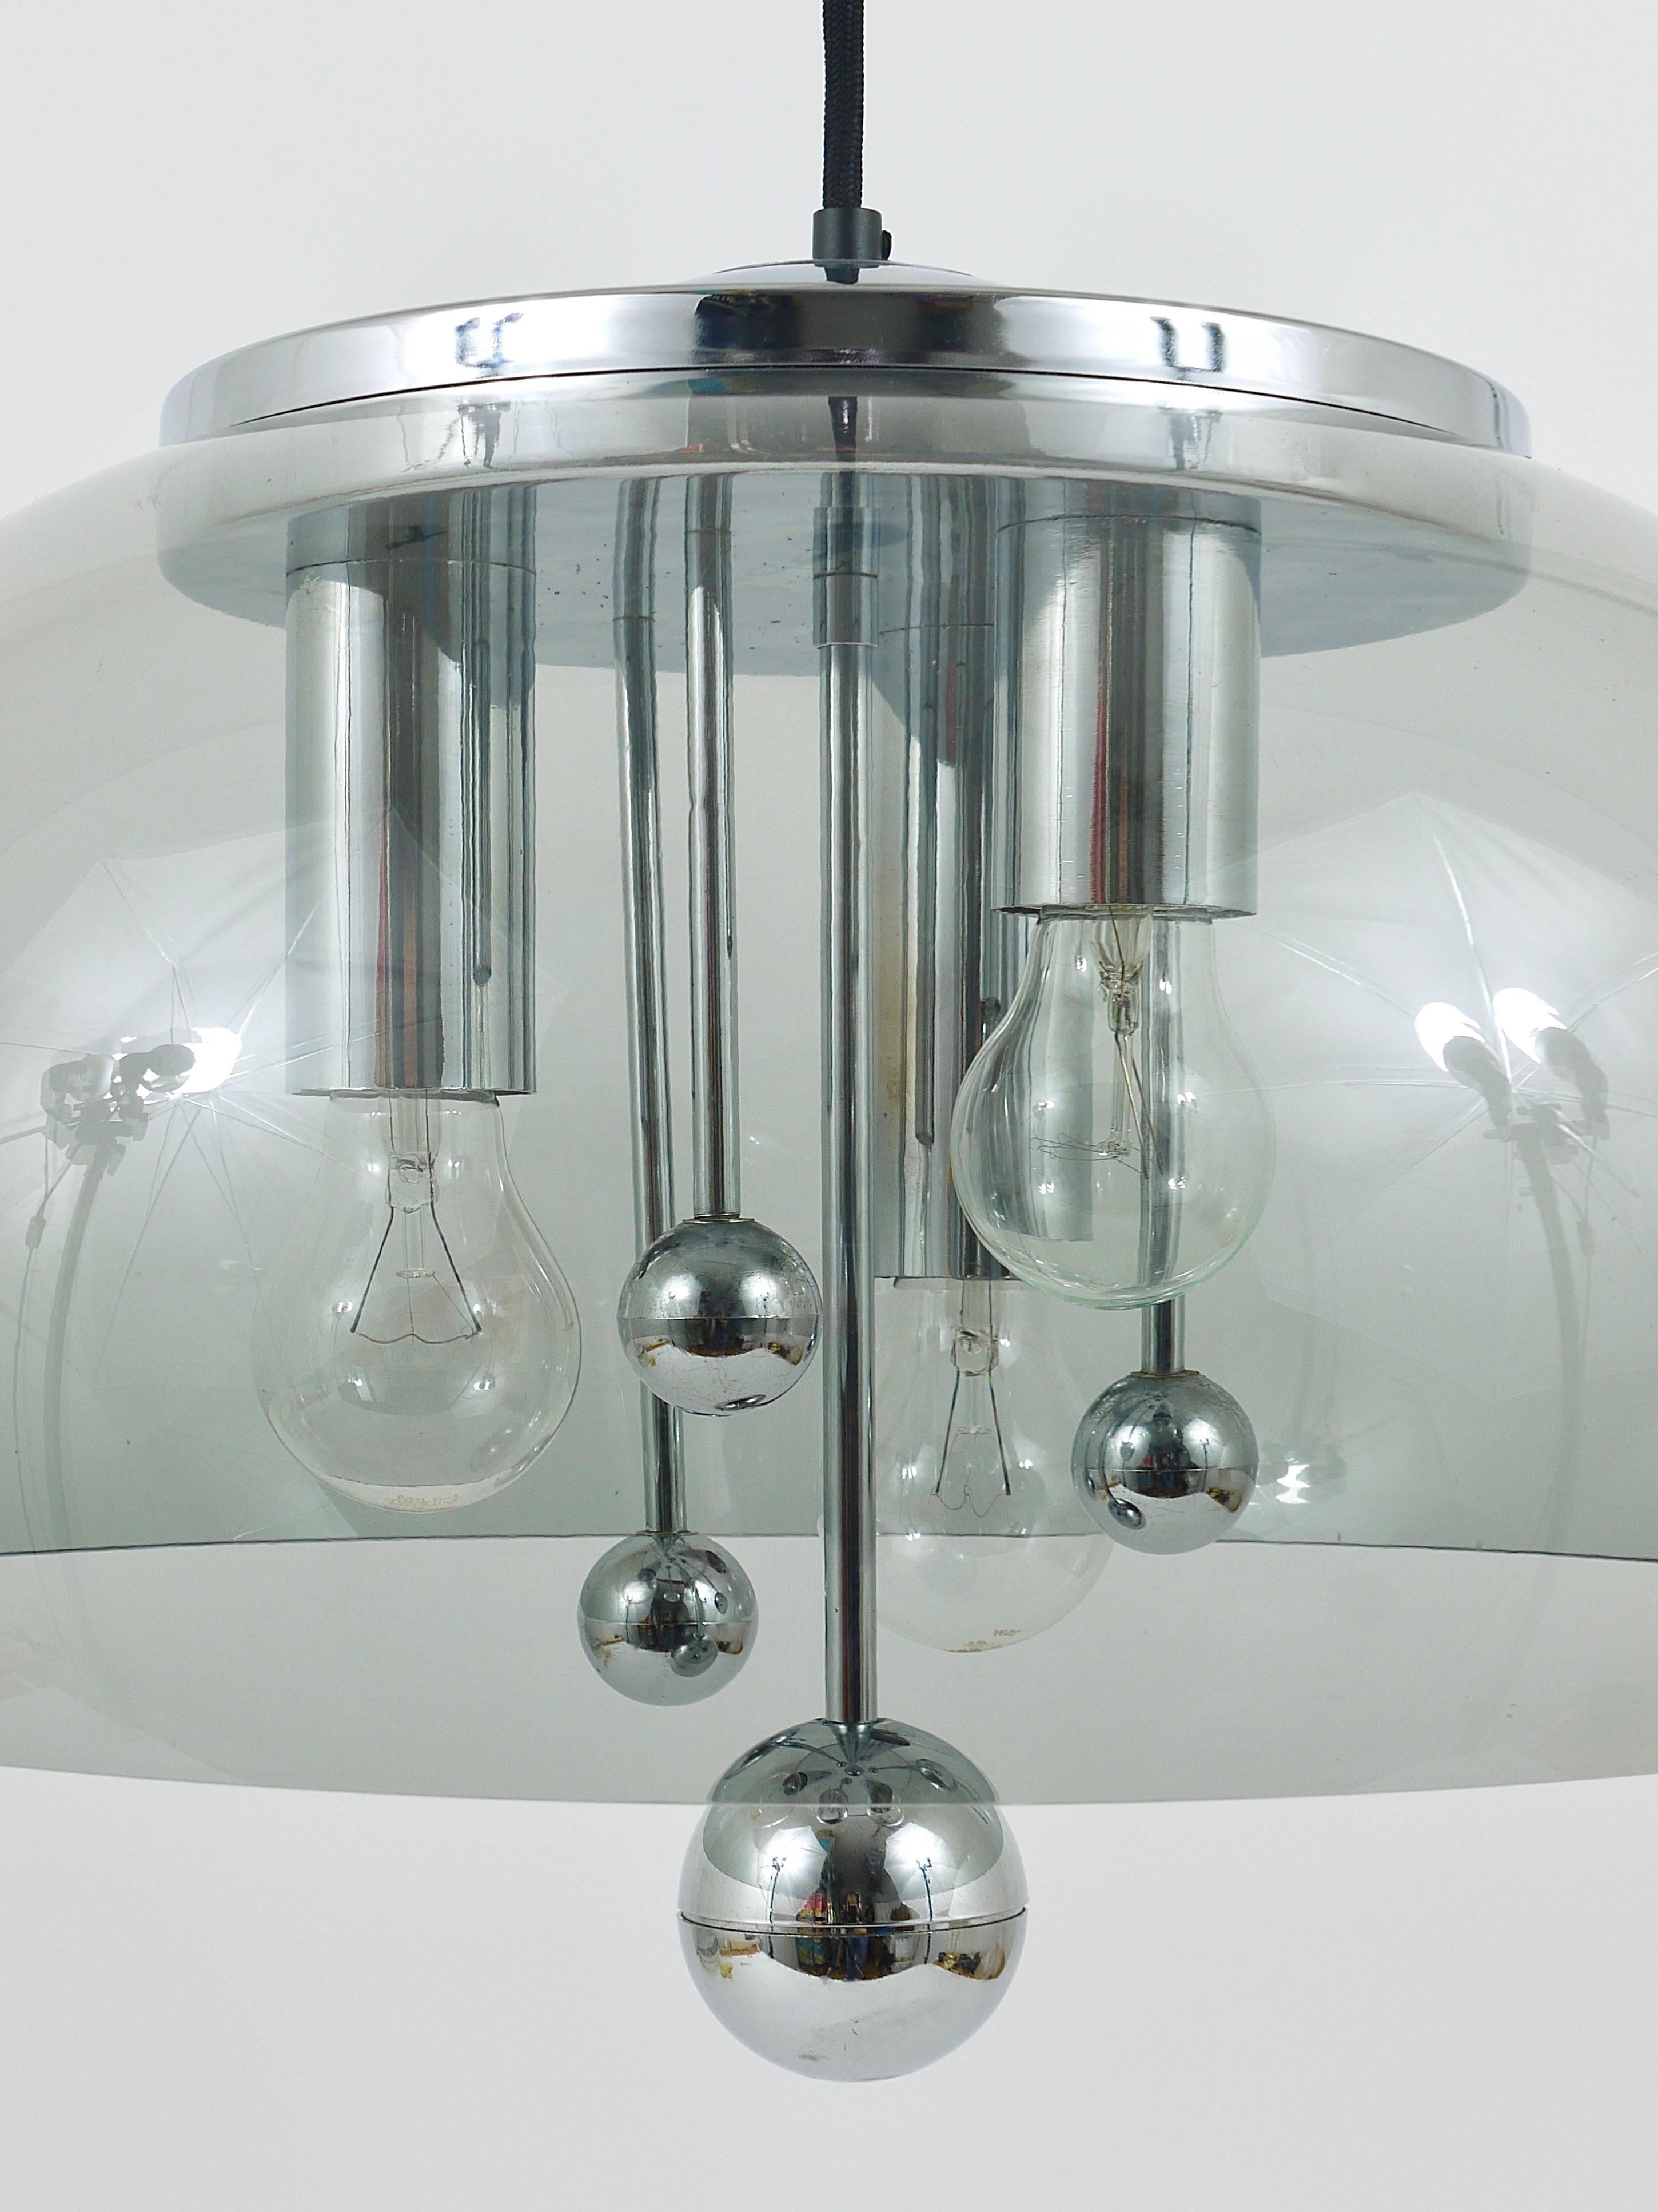 Midcentury Space Age Globe Pendant Lamp with Chromed Spheres, Germany, 1970s For Sale 11